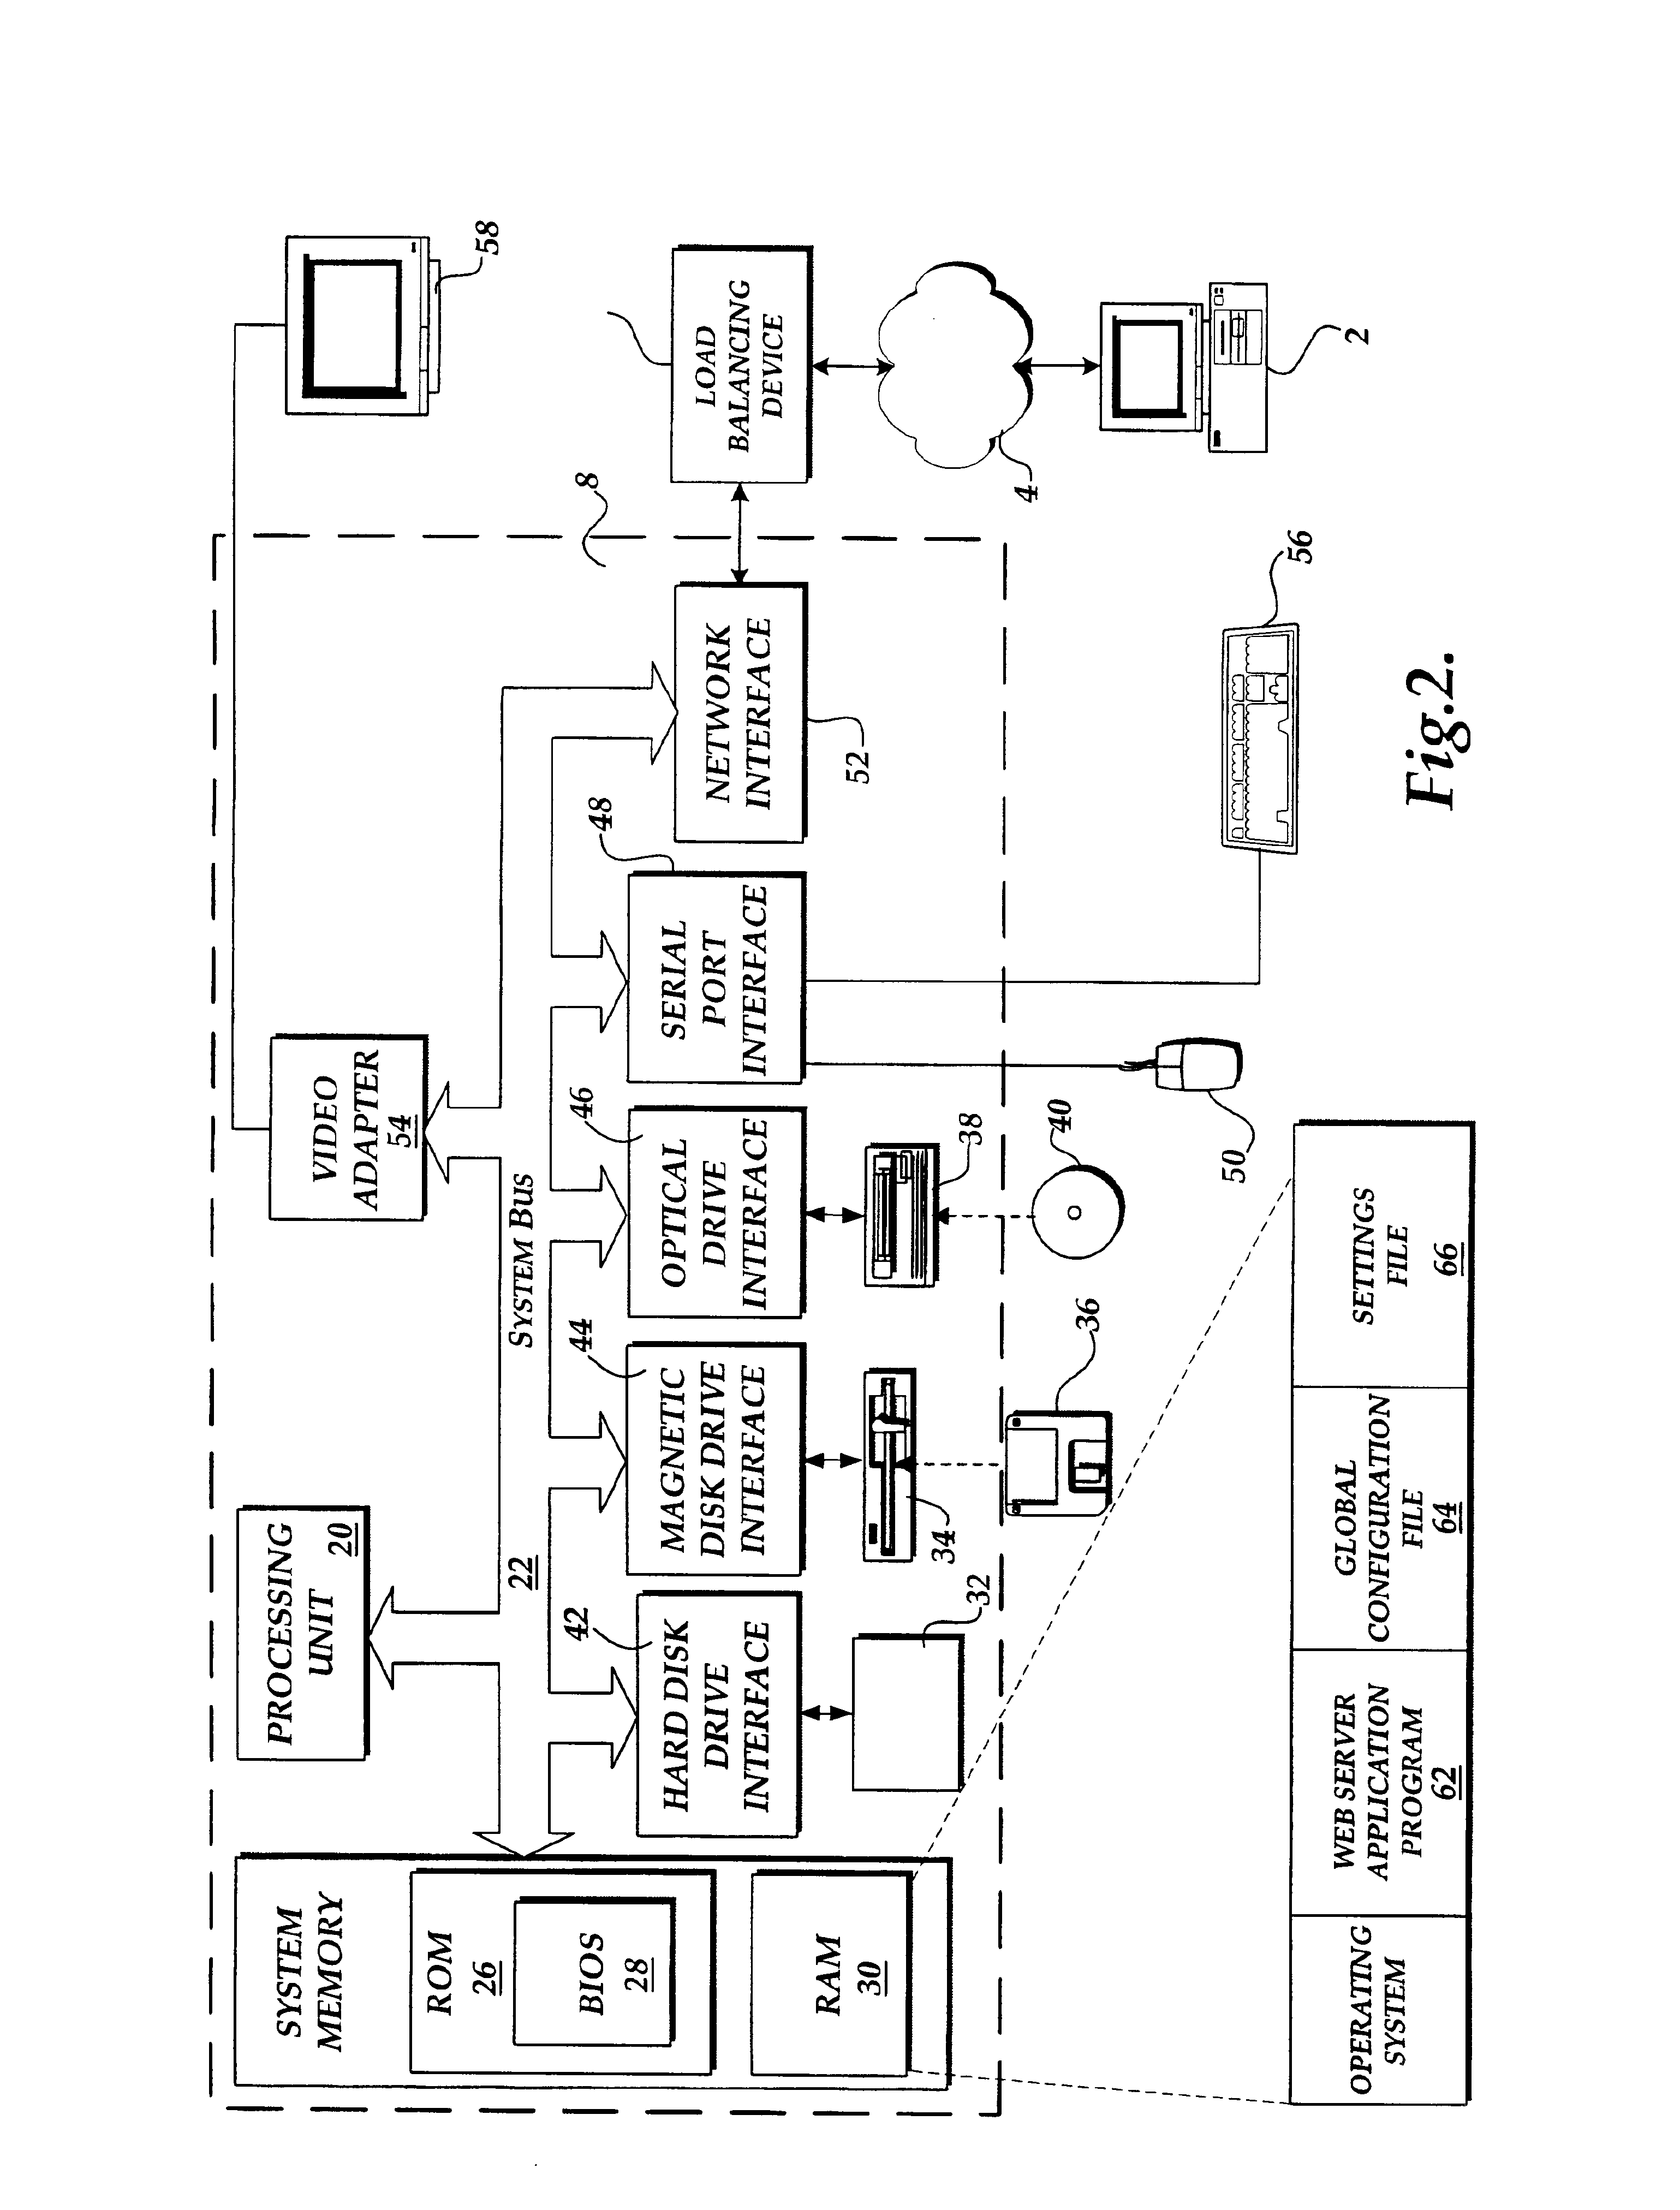 Method and apparatus for verifying the contents of a global configuration file